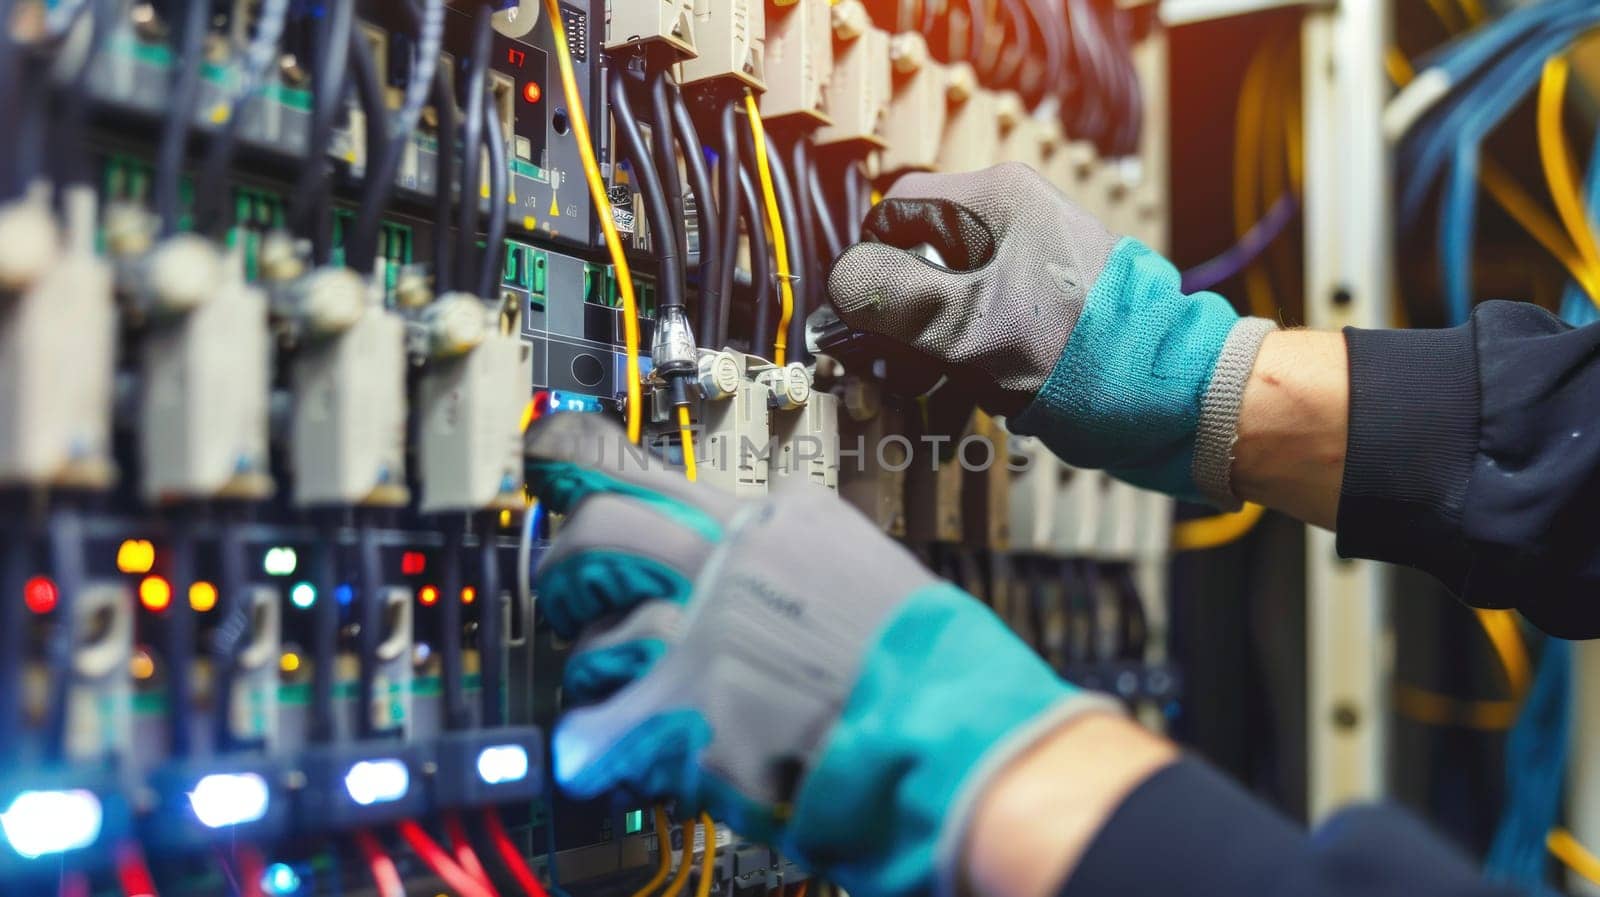 A man is working on a power box with his hands in blue gloves by golfmerrymaker